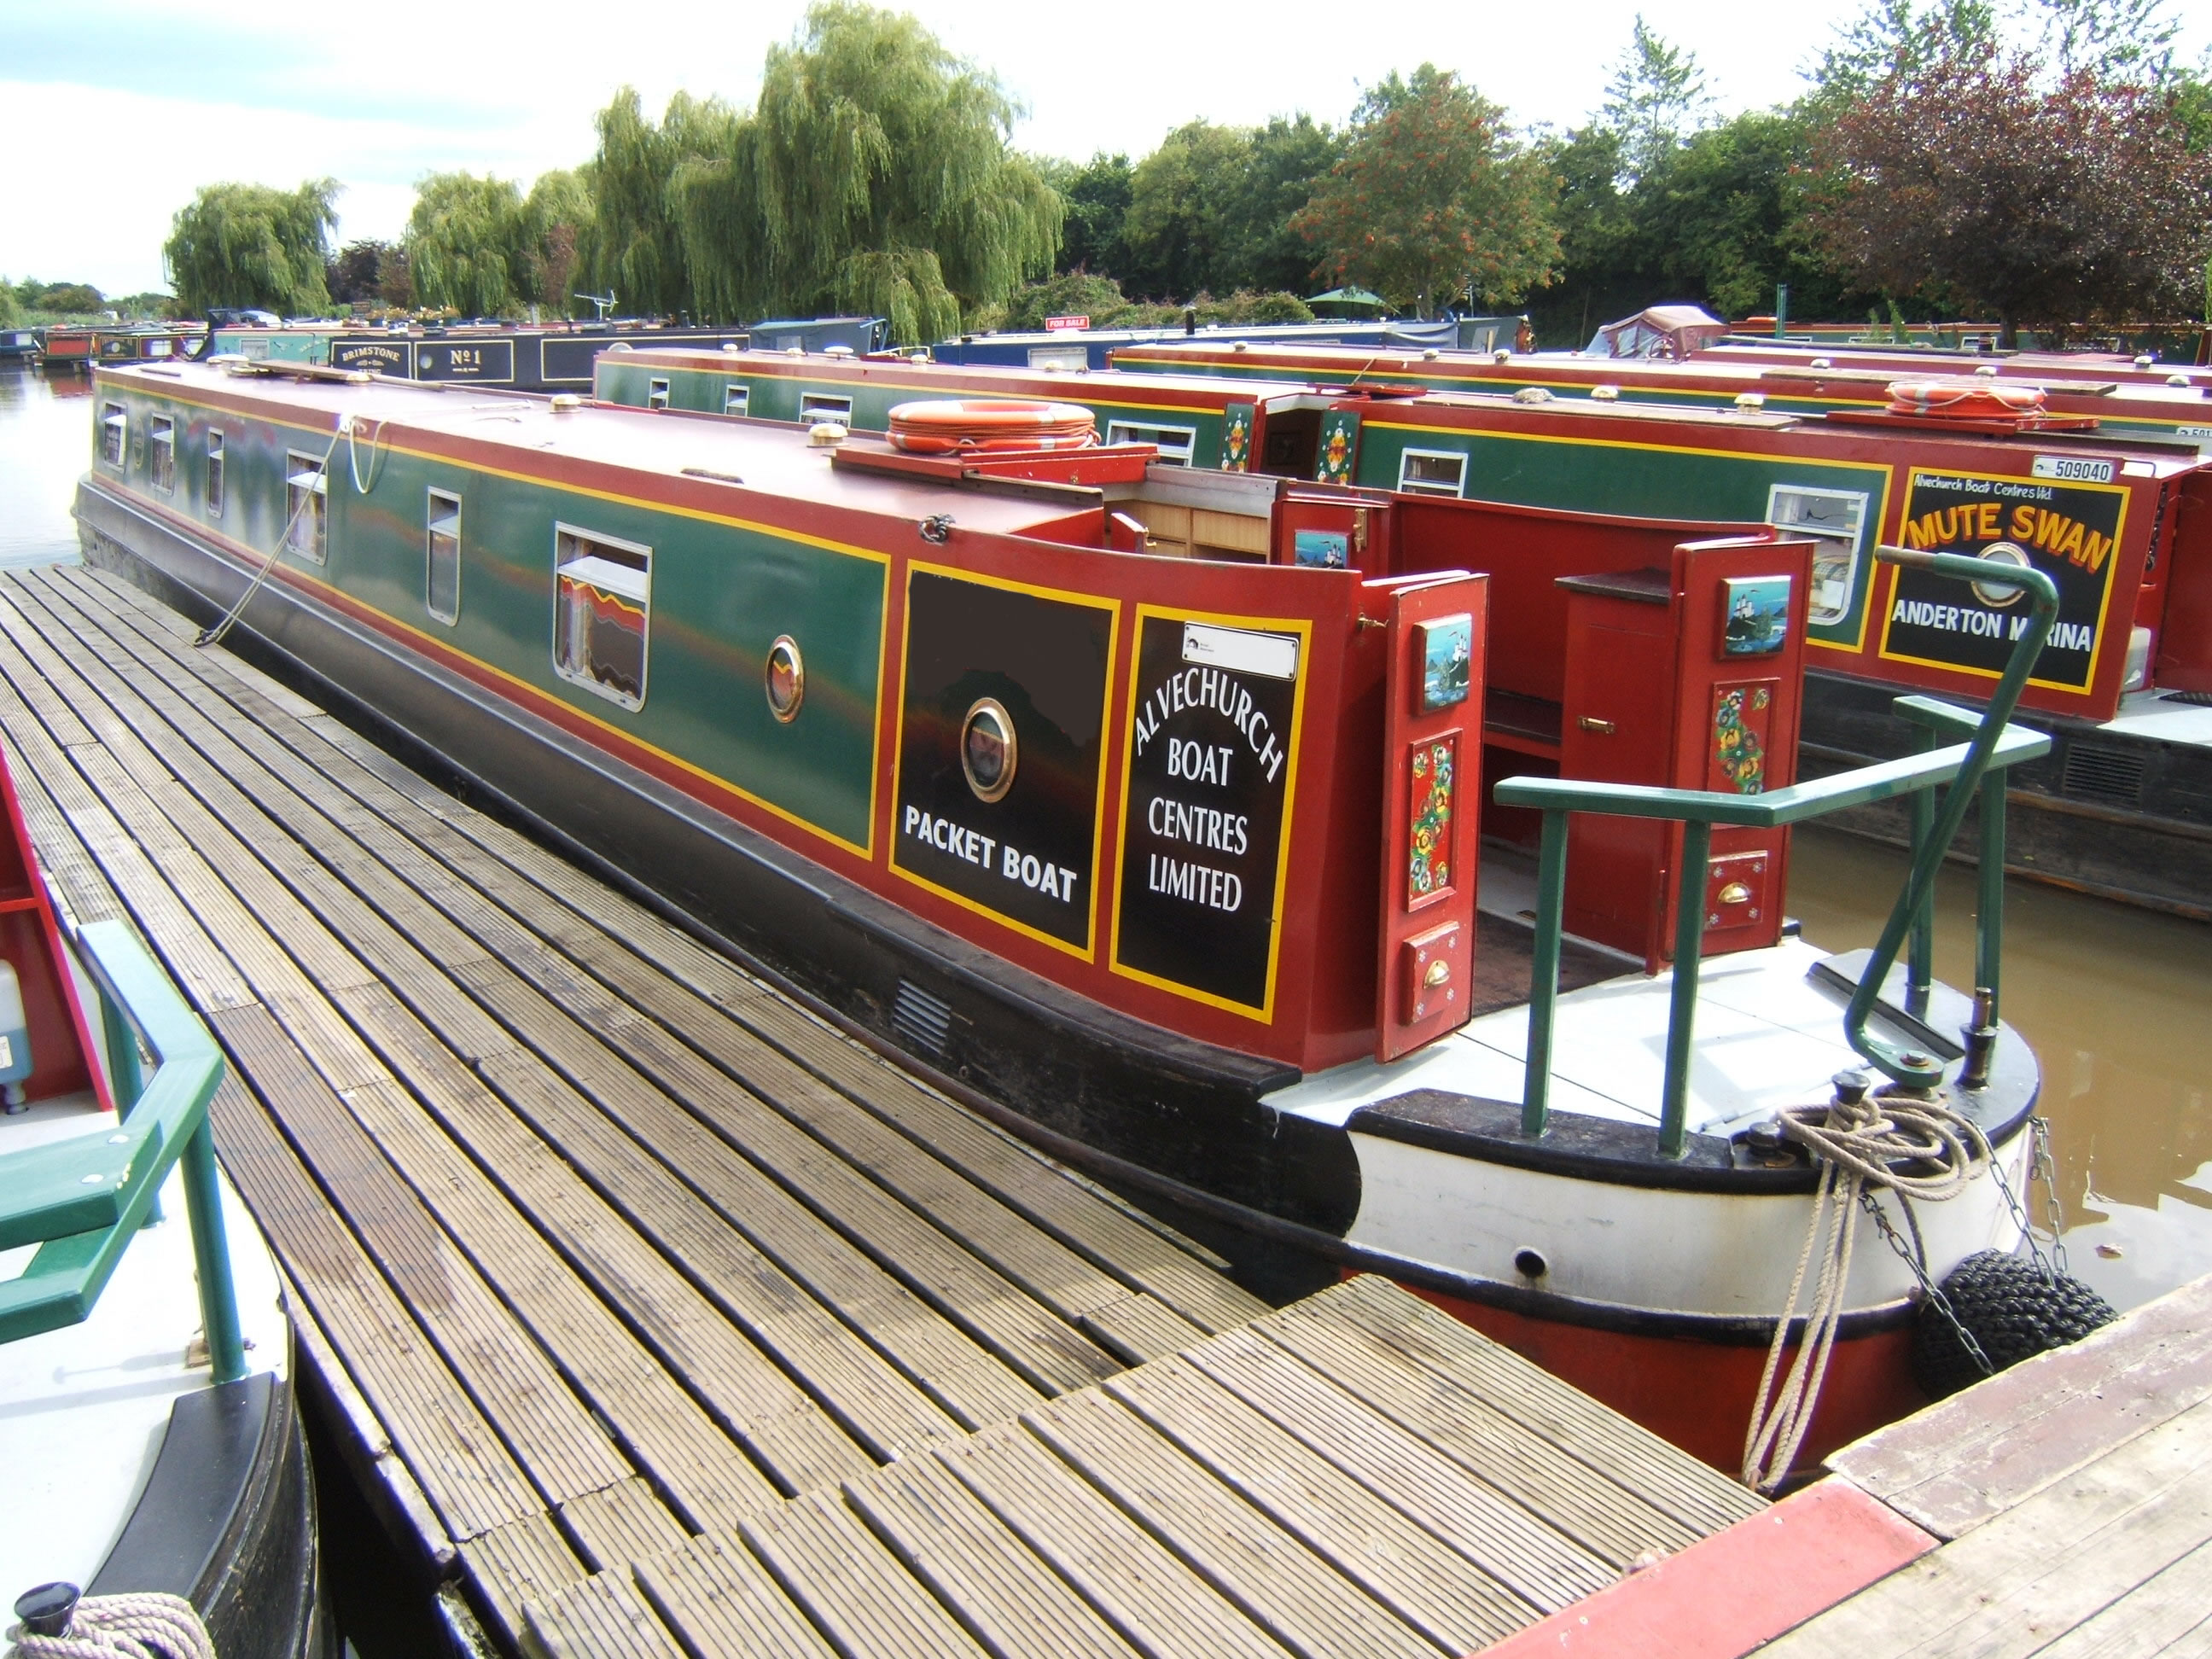 The Thrush class canal boat